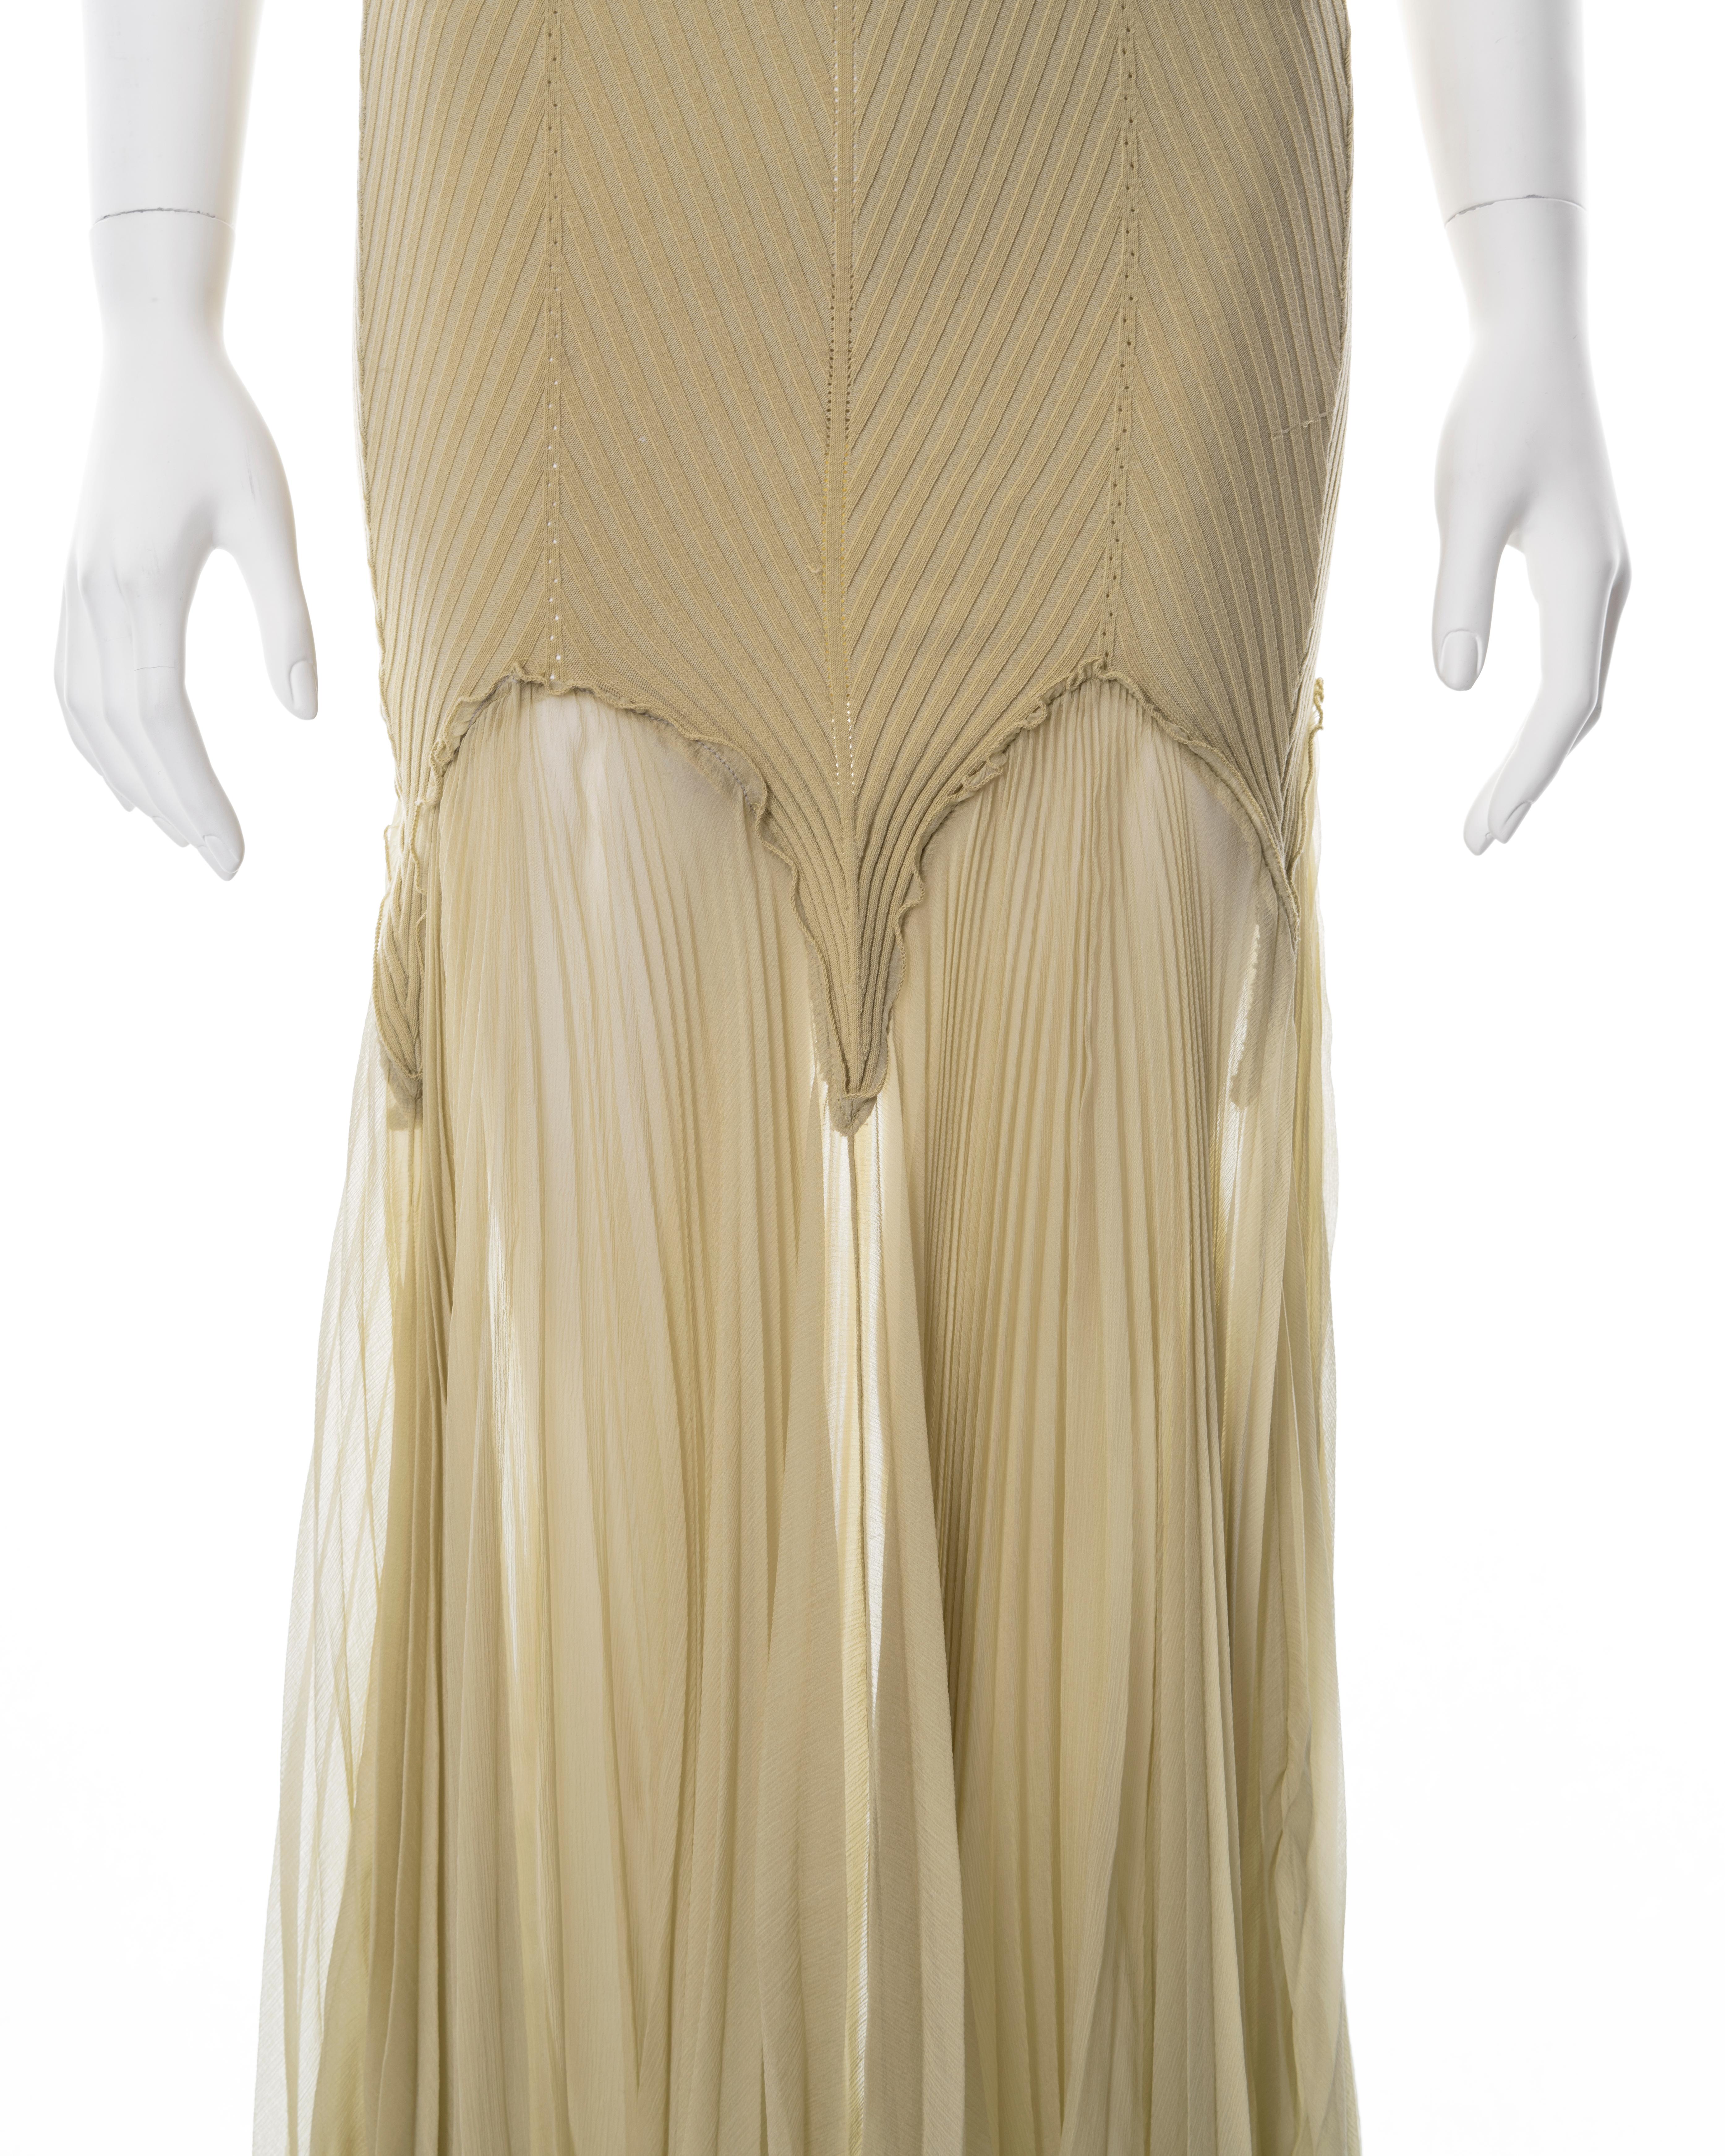 Women's Jean Paul Gaultier ribbed knit maxi dress with accordion pleated skirt, c. 2000